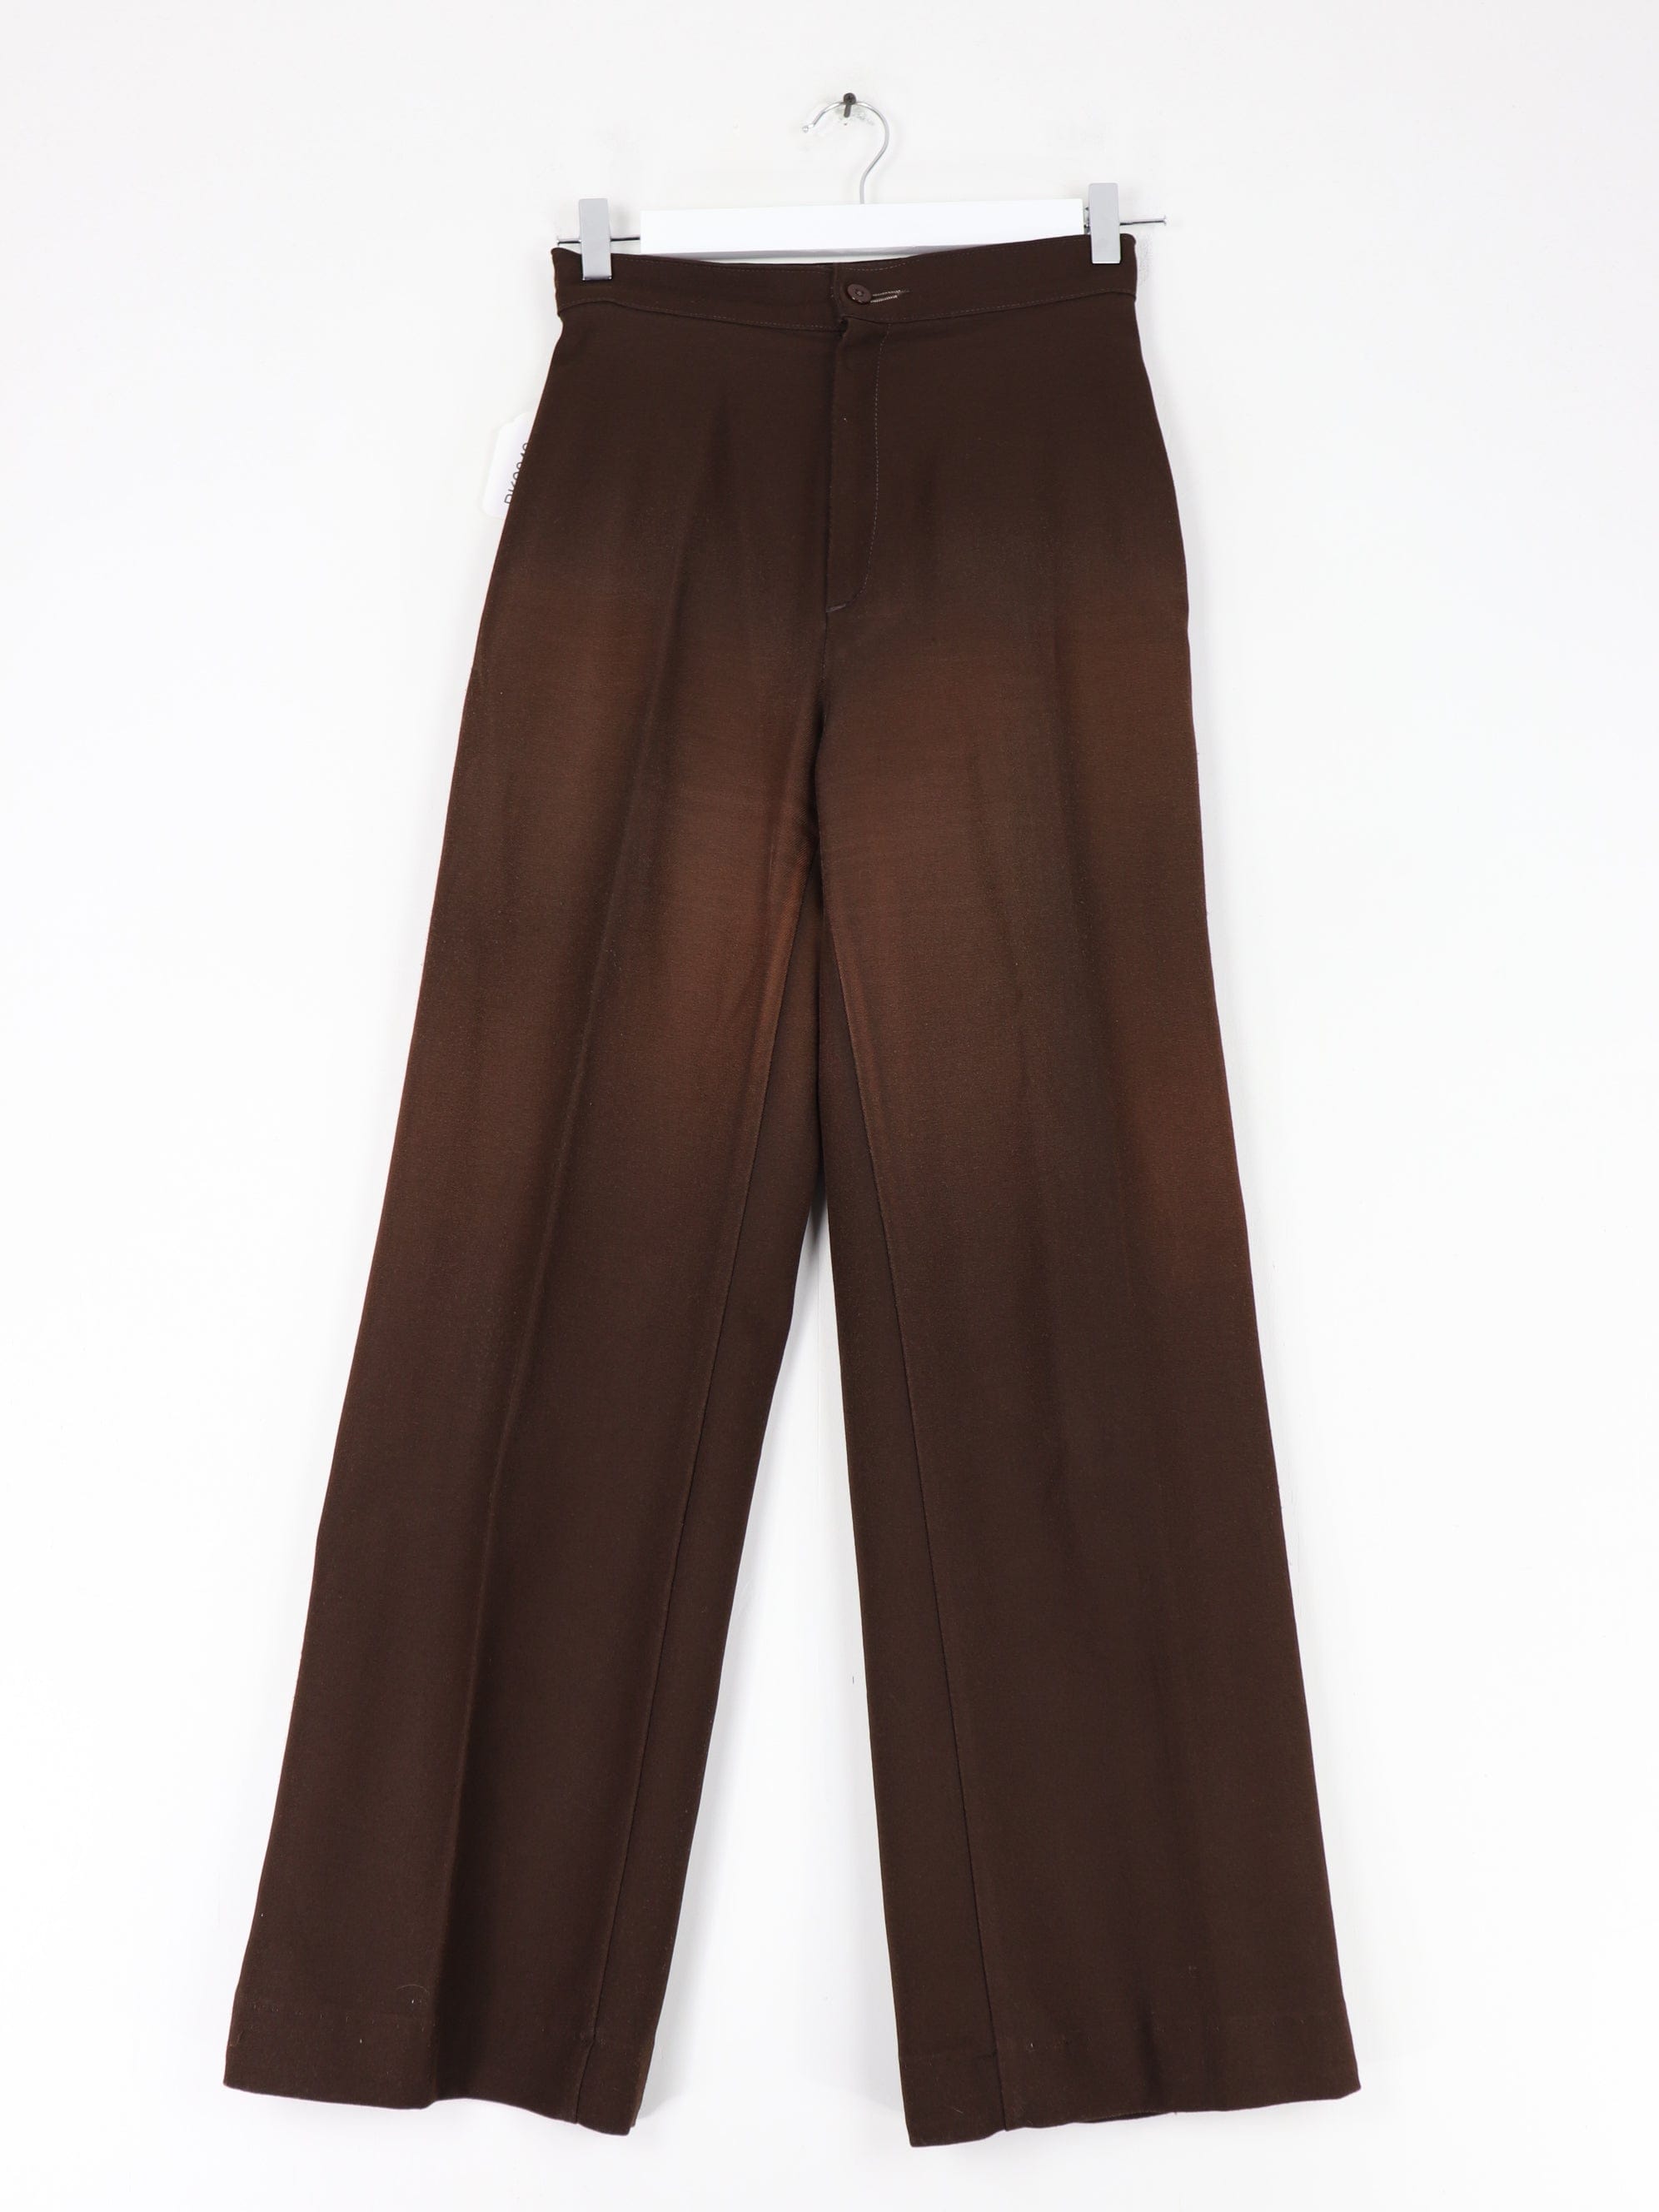 Vintage JC Penney Pants Womens 10 Brown Pleated Flare Trousers